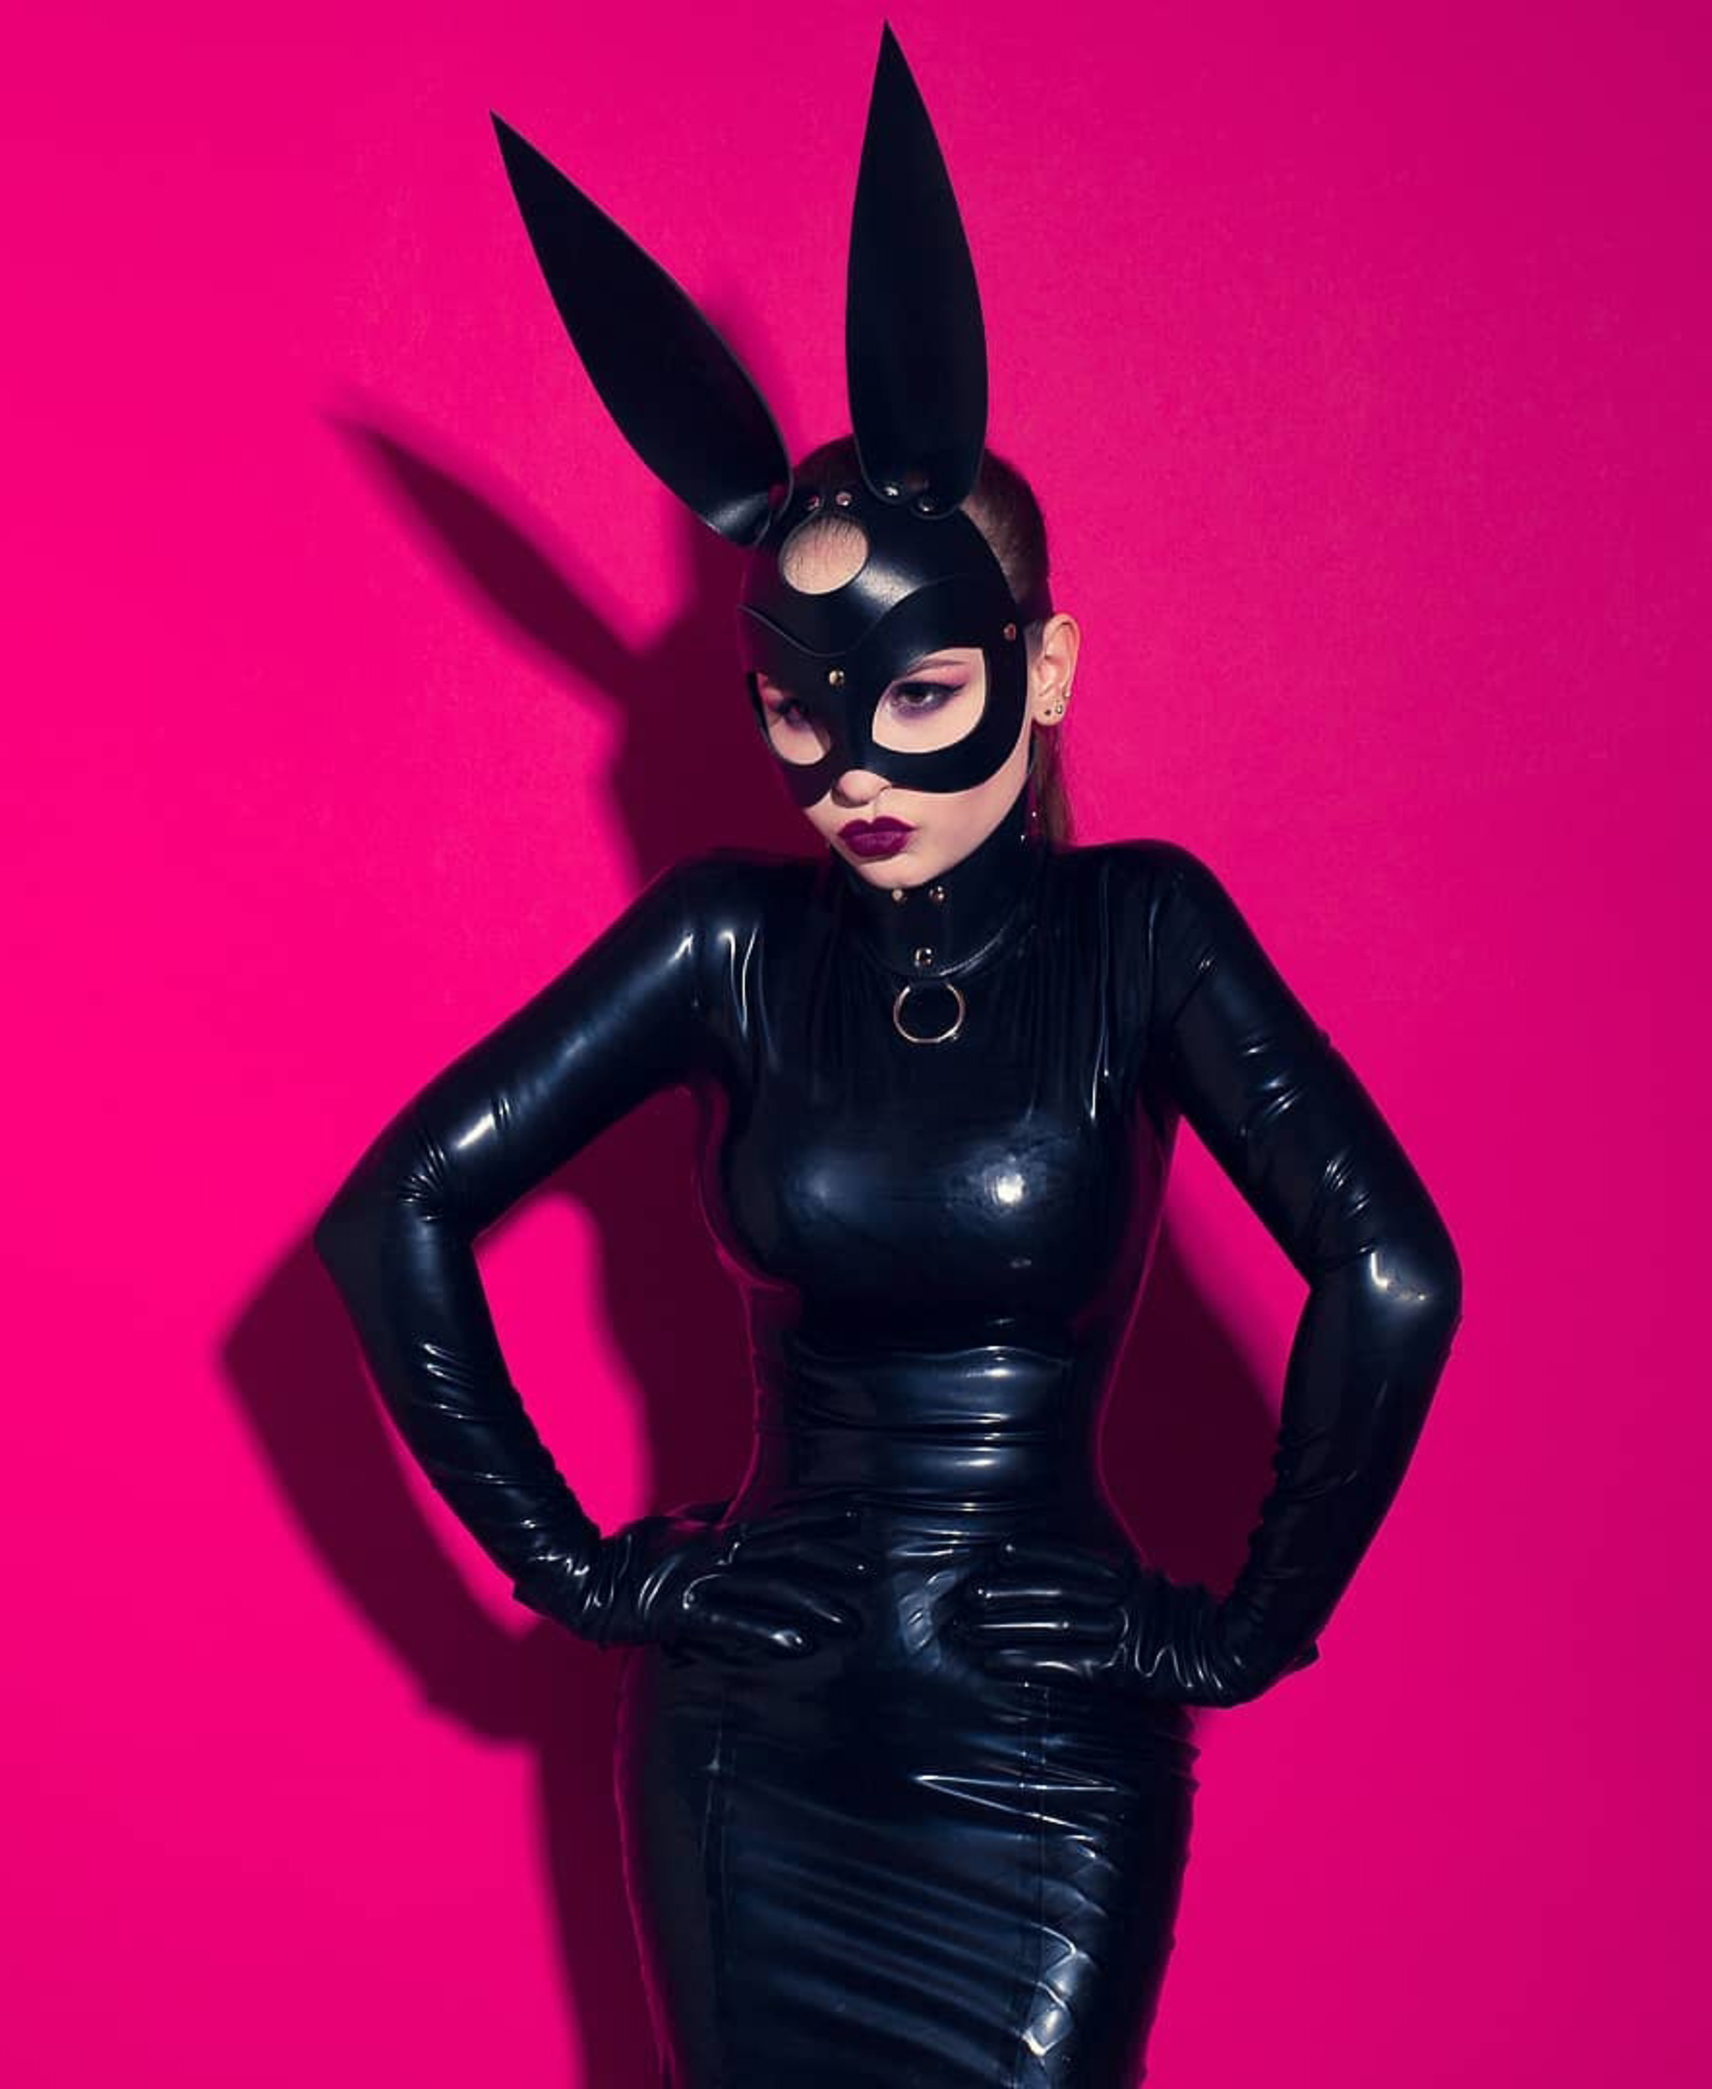 Leather sexy rabbit mask erotic for half the face and slits for the eyes, comfortable for BDSM